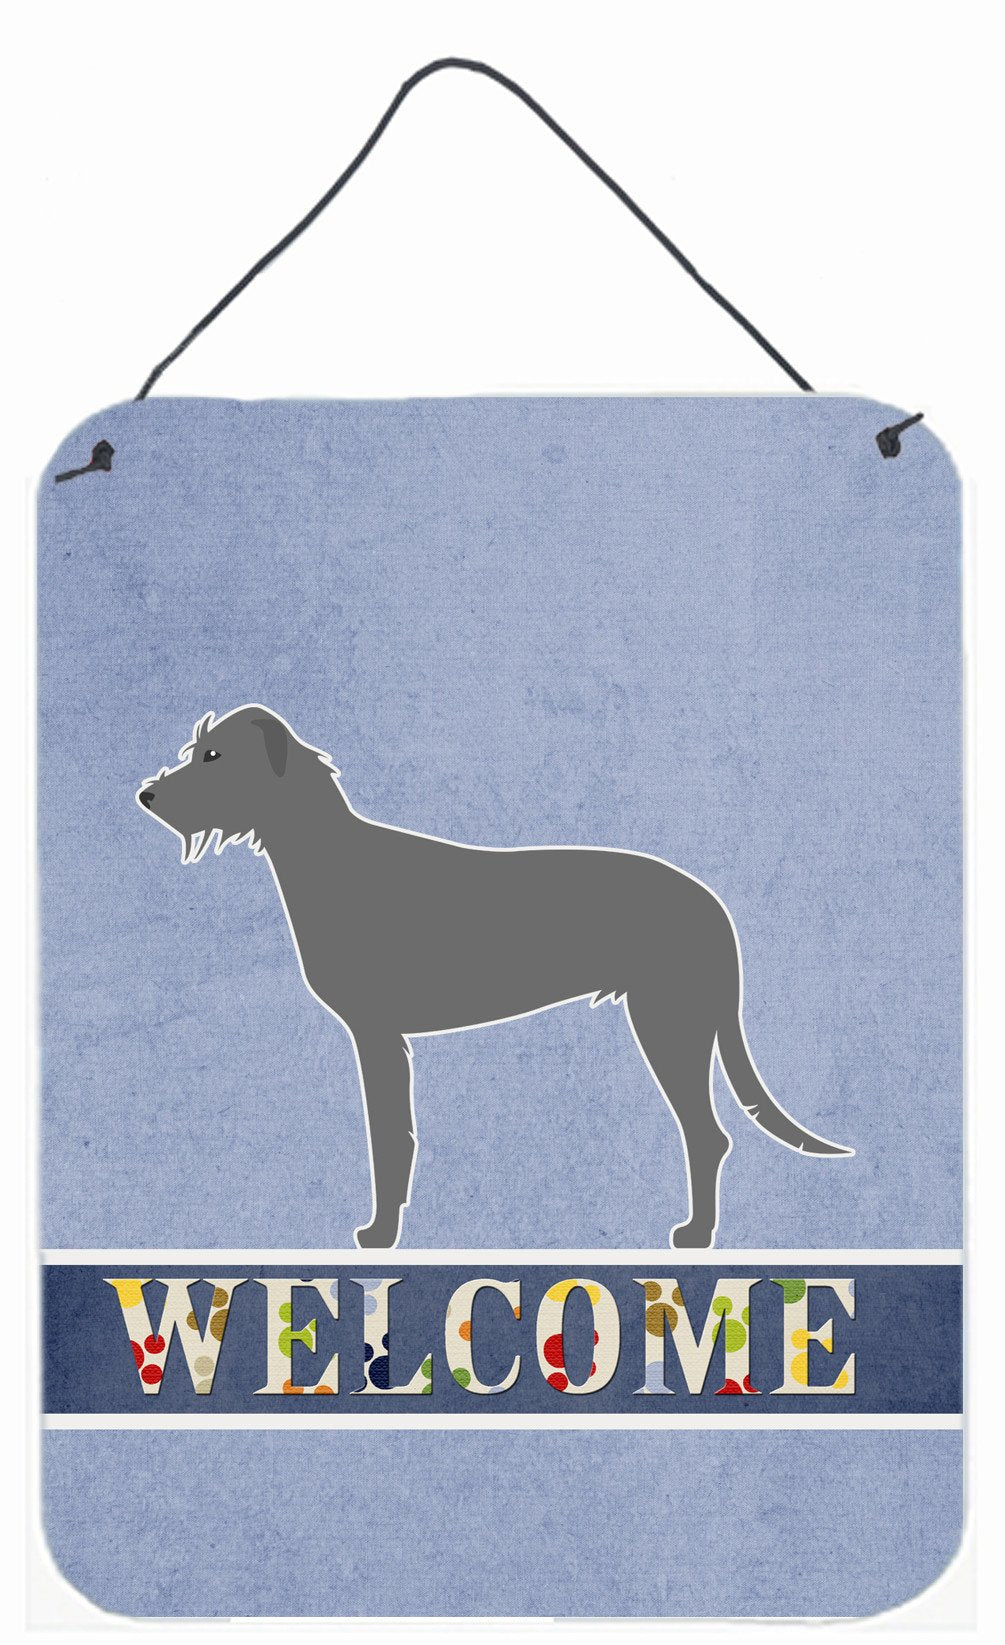 Irish Wolfhound Welcome Wall or Door Hanging Prints BB5507DS1216 by Caroline's Treasures